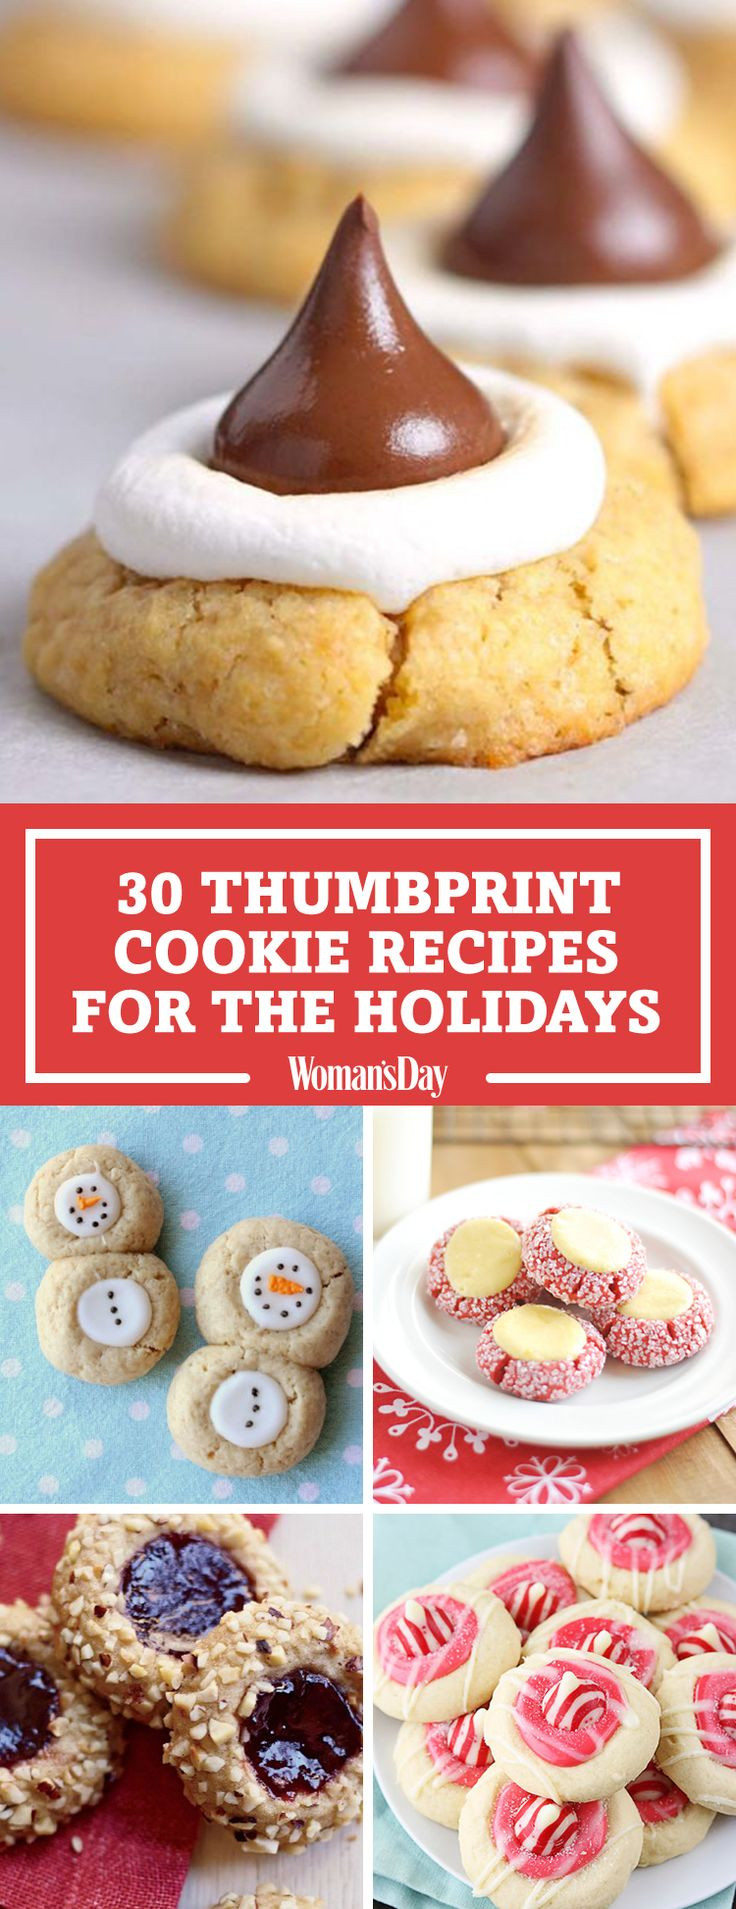 Christmas Baking Goods Recipes
 Best 25 Christmas cookie recipes ideas on Pinterest